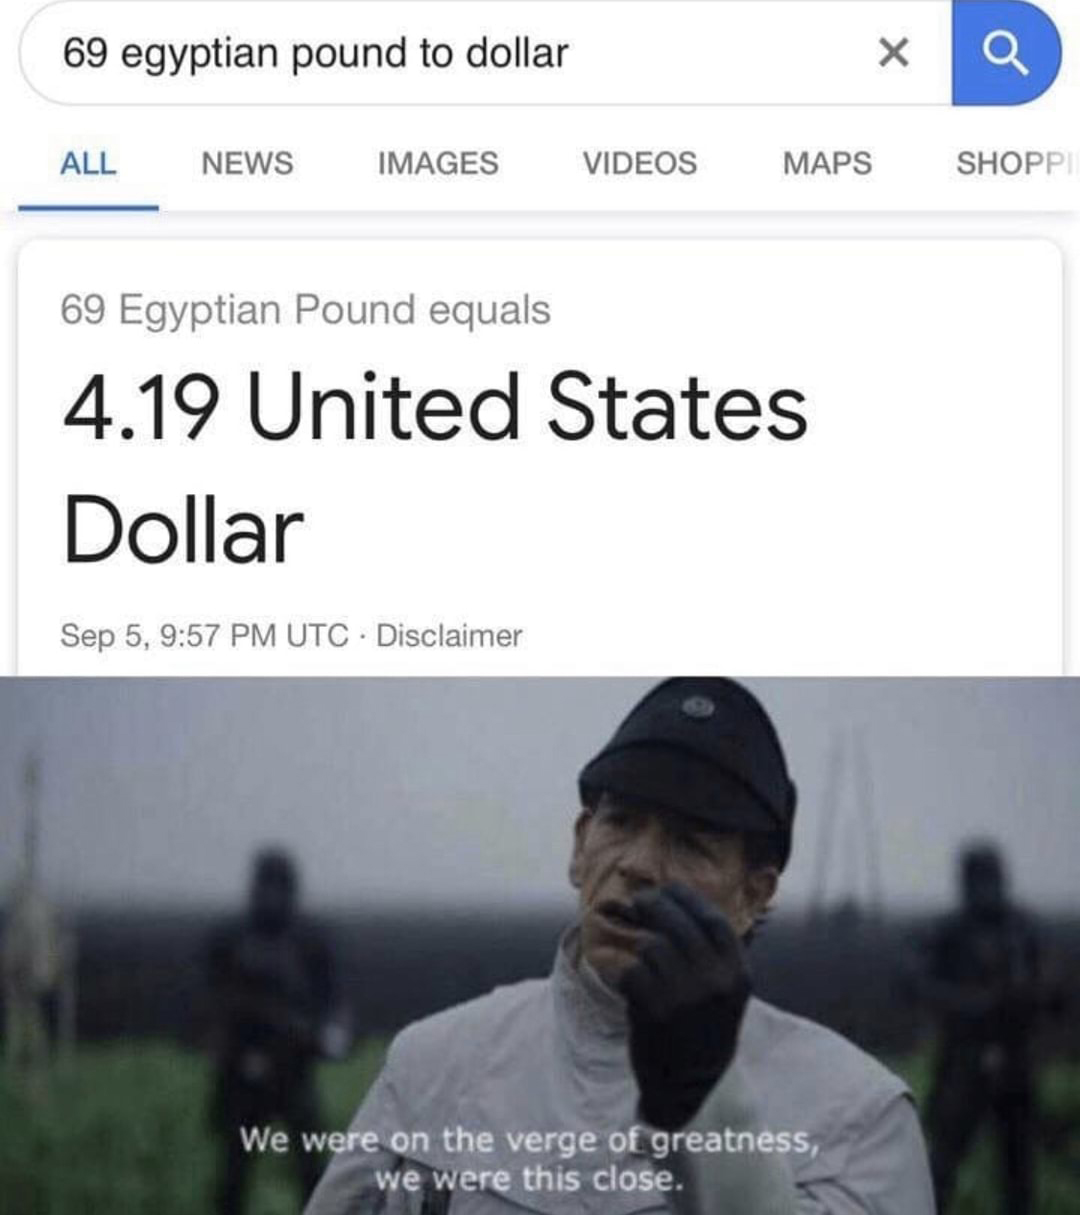 farming really a man of your talents - 69 egyptian pound to dollar All News Images Videos Maps Shoppi 69 Egyptian Pound equals 4.19 United States Dollar Sep 5, Utc . Disclaimer We were on the verge of greatness, we were this close.